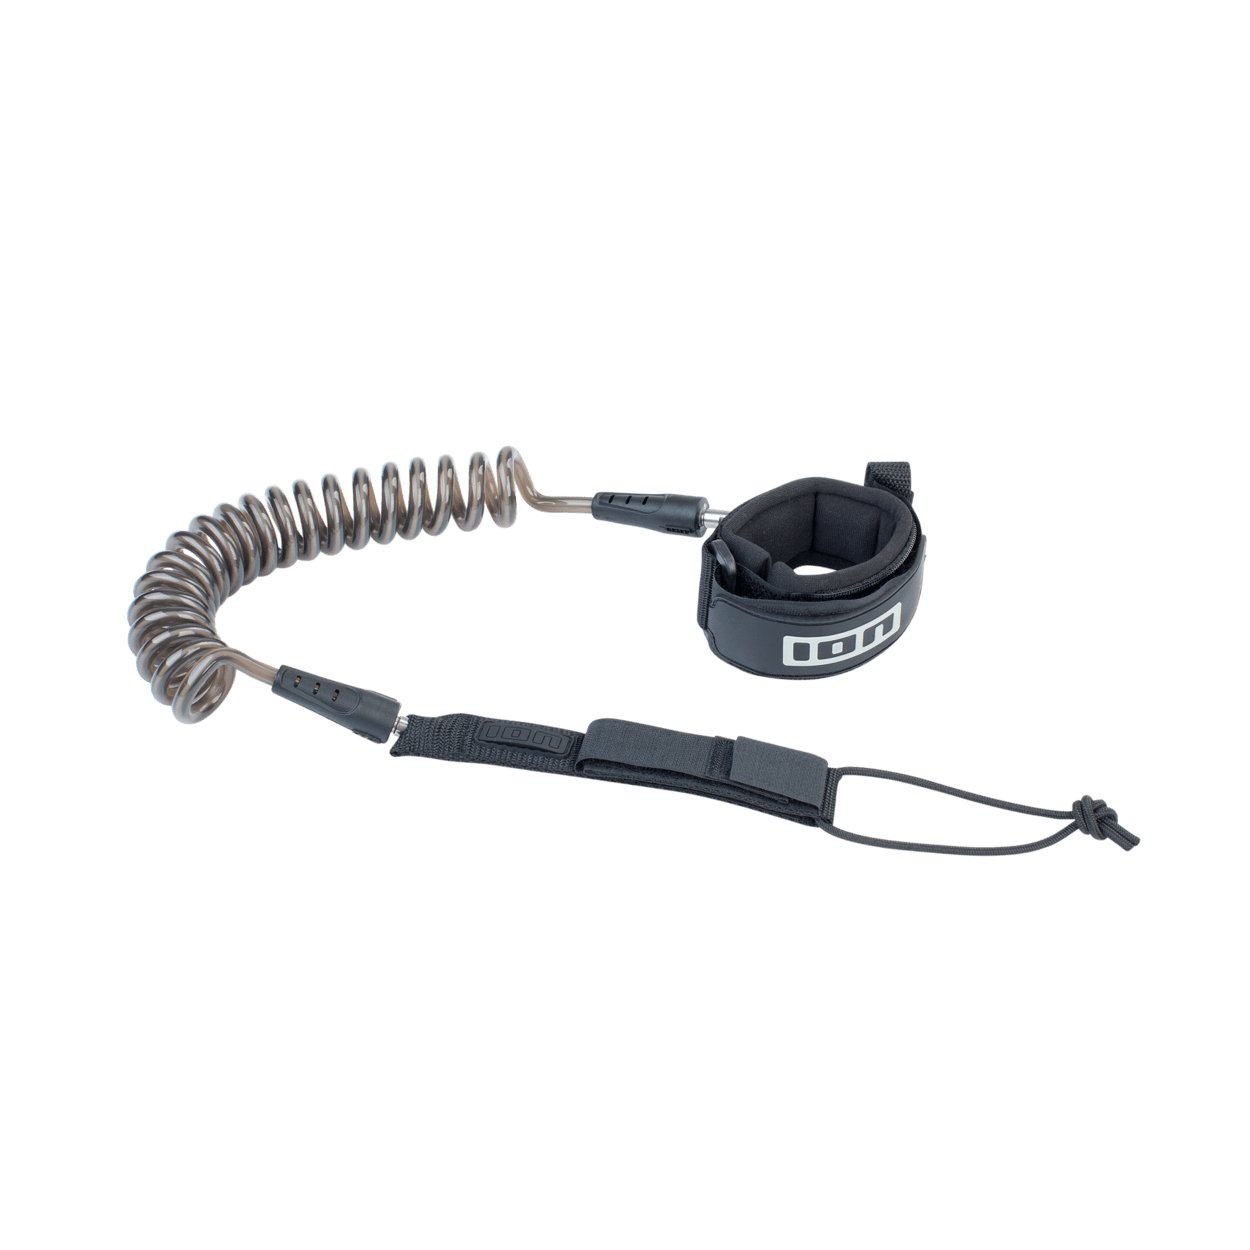 ION Wing Leash Core Coiled Wrist 2022 - Worthing Watersports - 9010583059891 - Accessories - ION Water